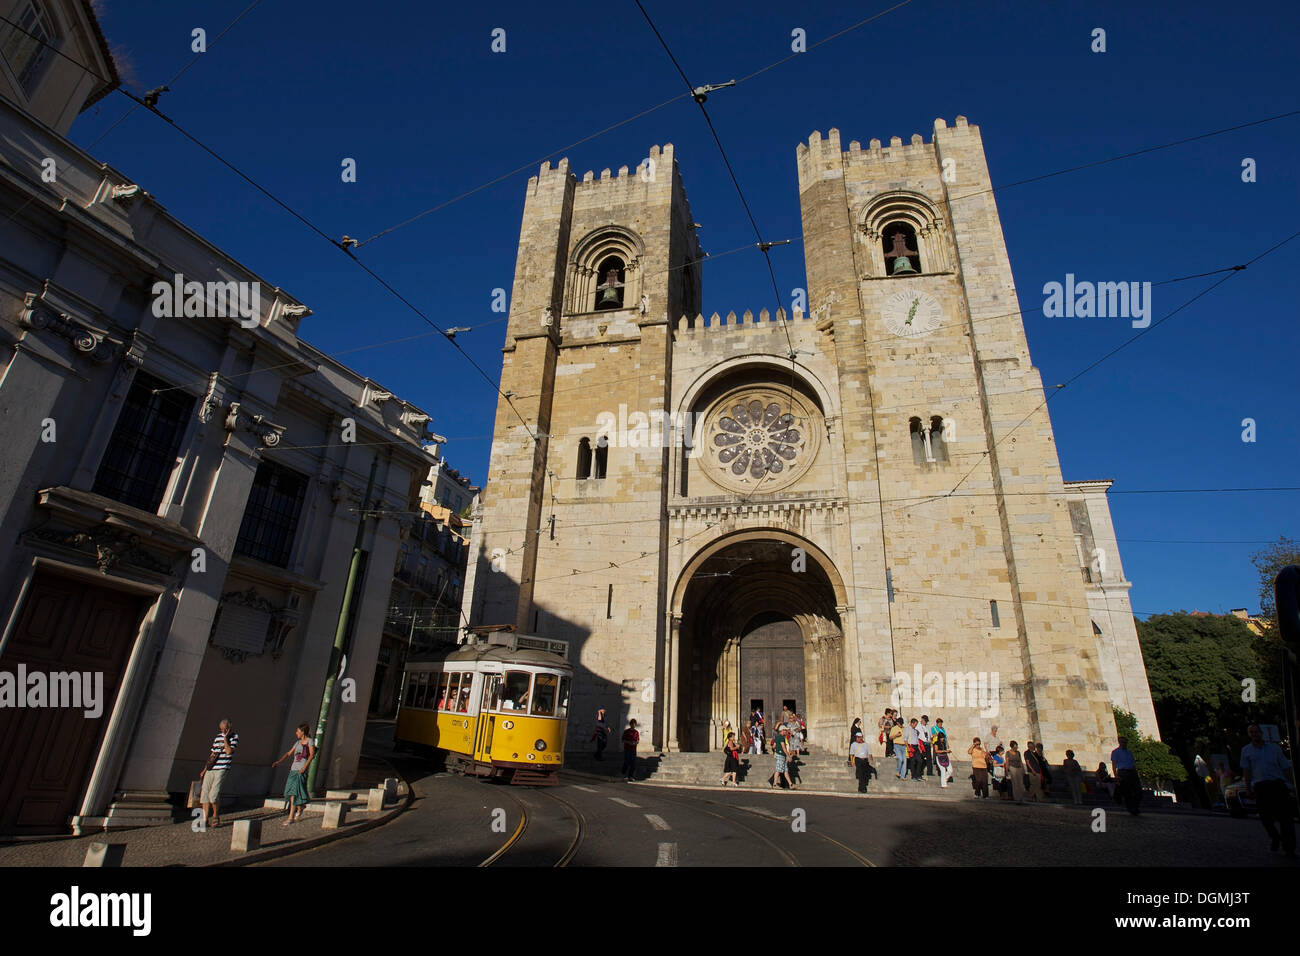 Yellow tram in front of the Sé Cathedral or Catedral Sé Patriarcal, Lisbon, Portugal, Europe Stock Photo